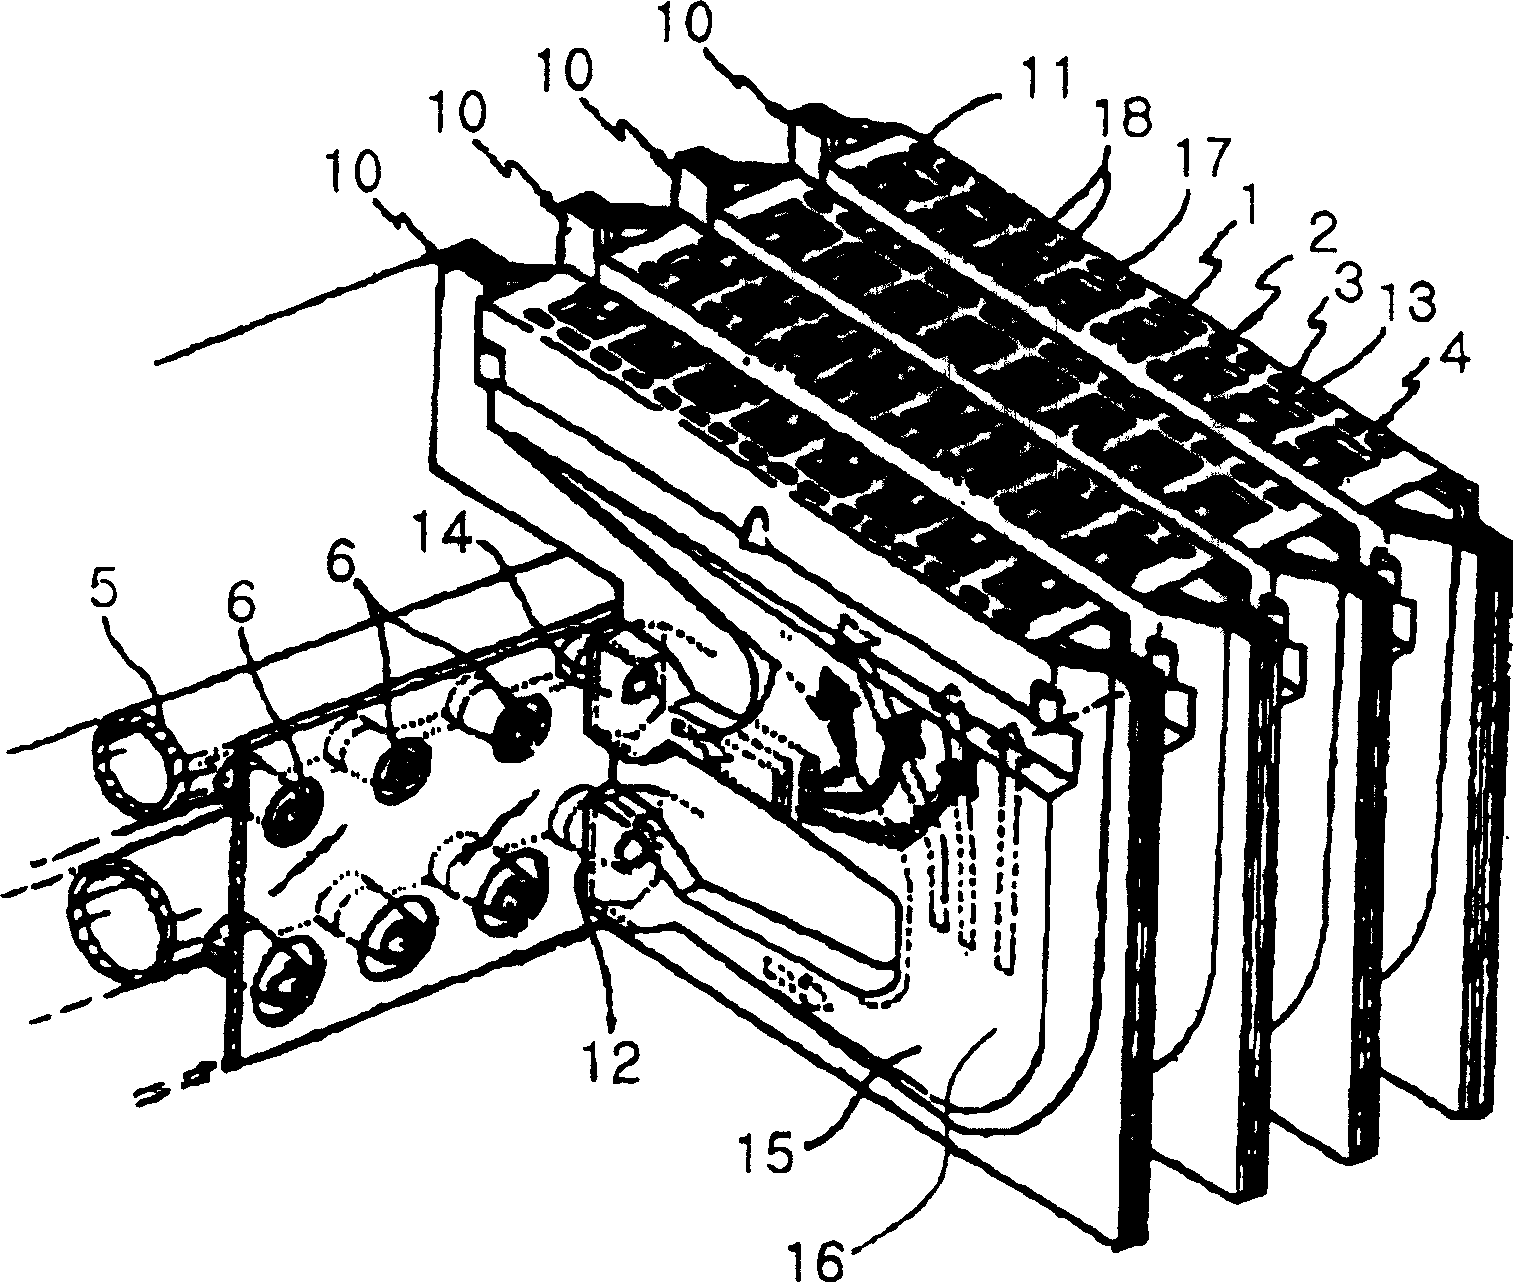 Gas burner with space by mixing gas fuel with sucked air